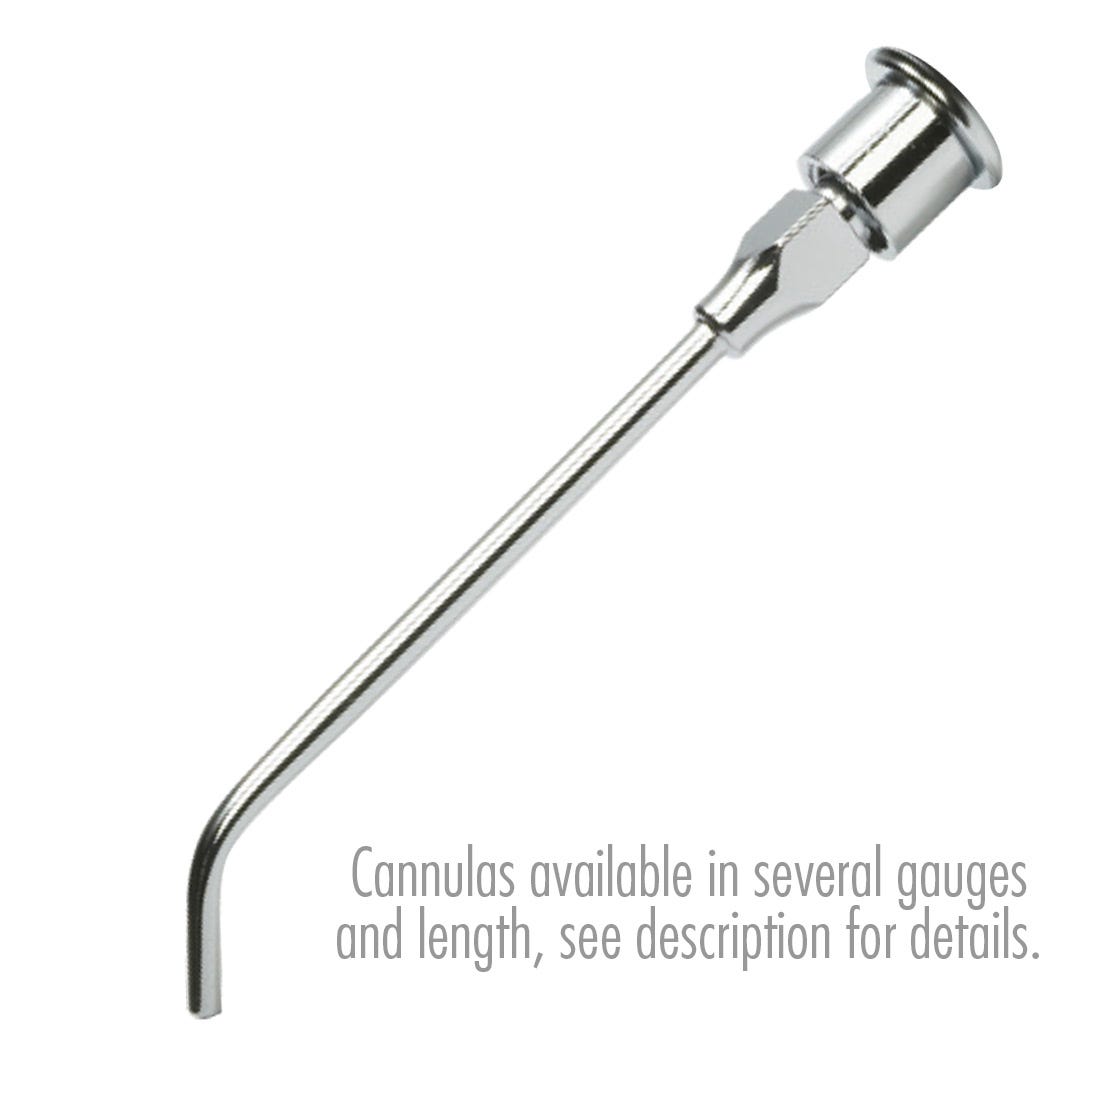 ACE Irrigation Cannula - Stainless Steel 16G x 3" , 45 degree angle